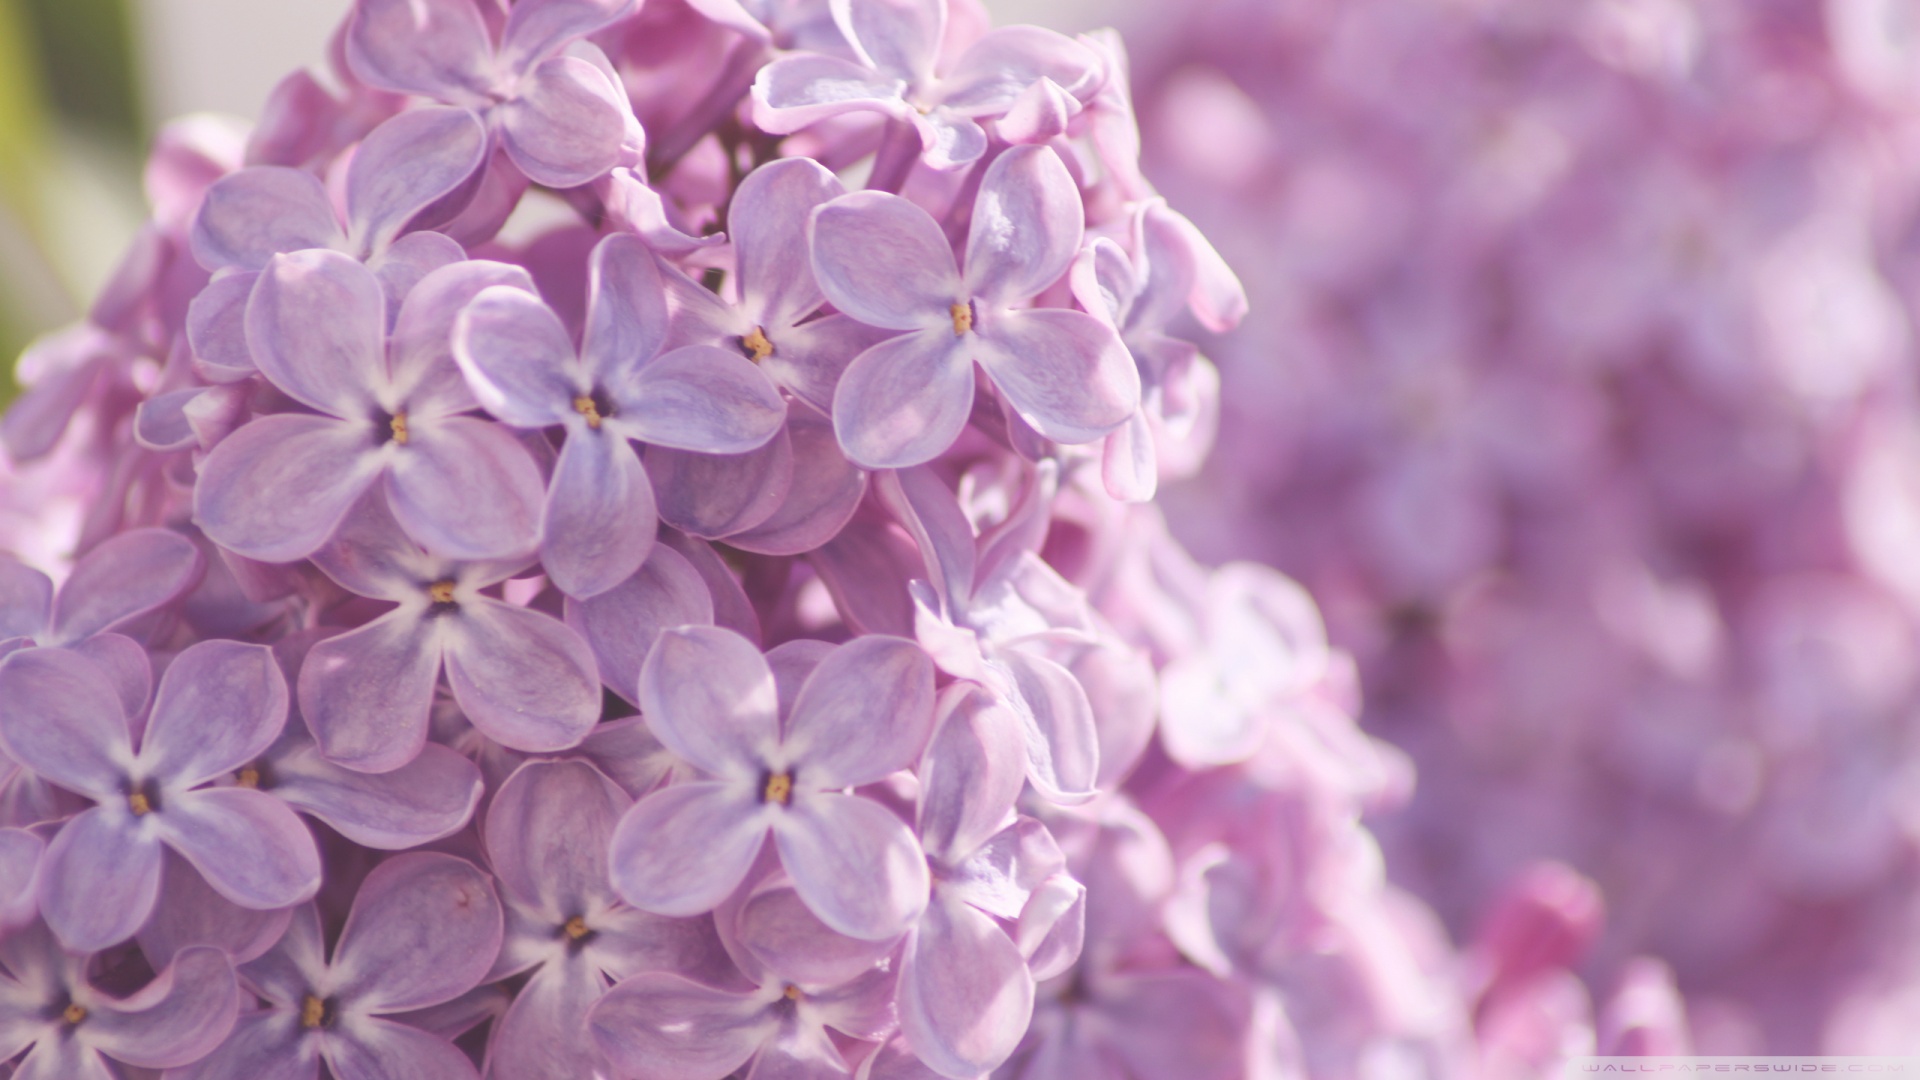 Pink Lilac Flowers wallpapers HD free